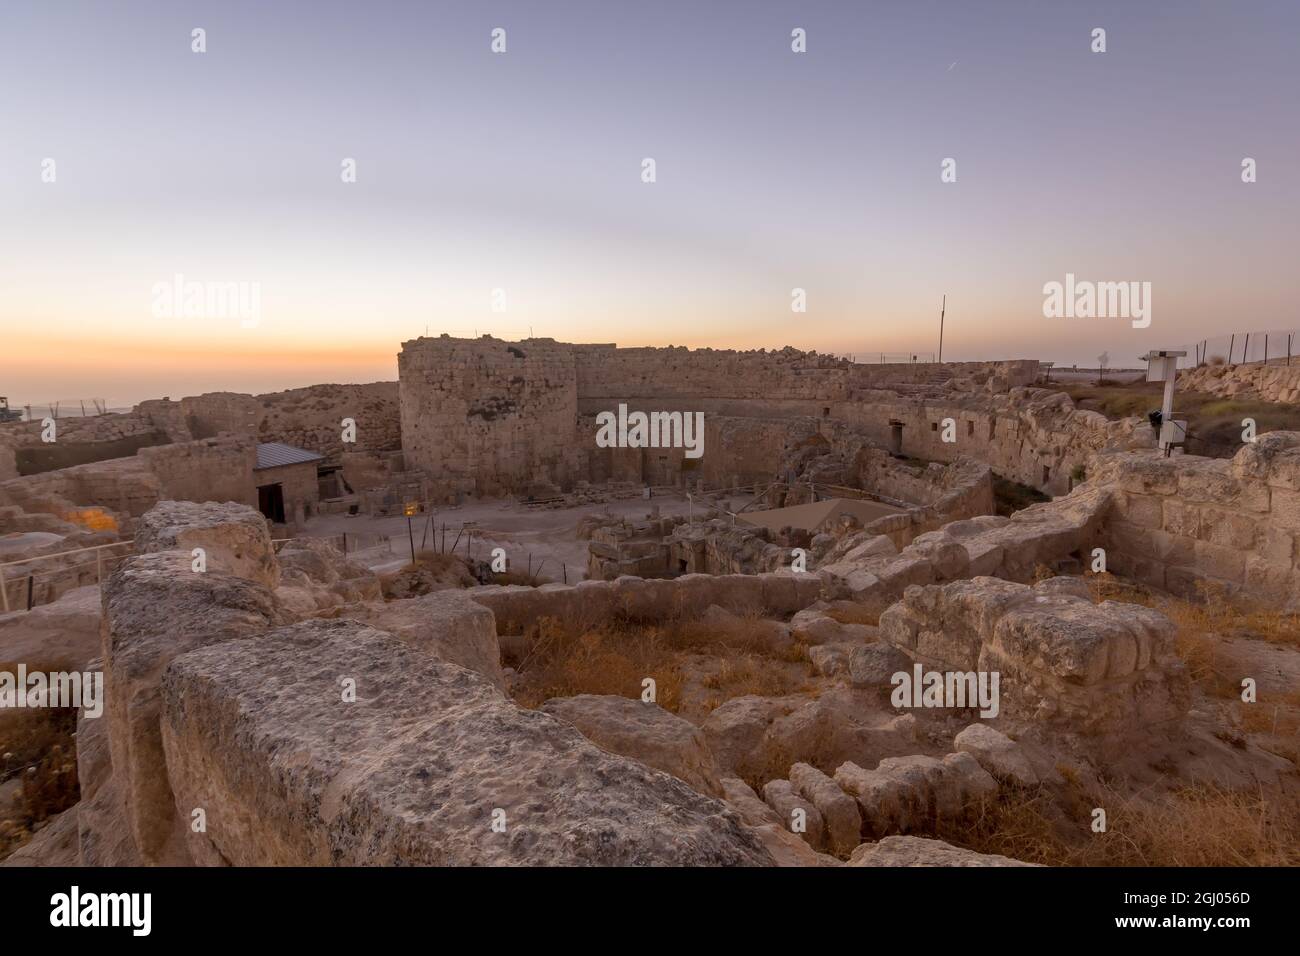 Sunrise view of the Upper Herodium Fortress and Palace (National Park), in the West Bank, South of Jerusalem Stock Photo